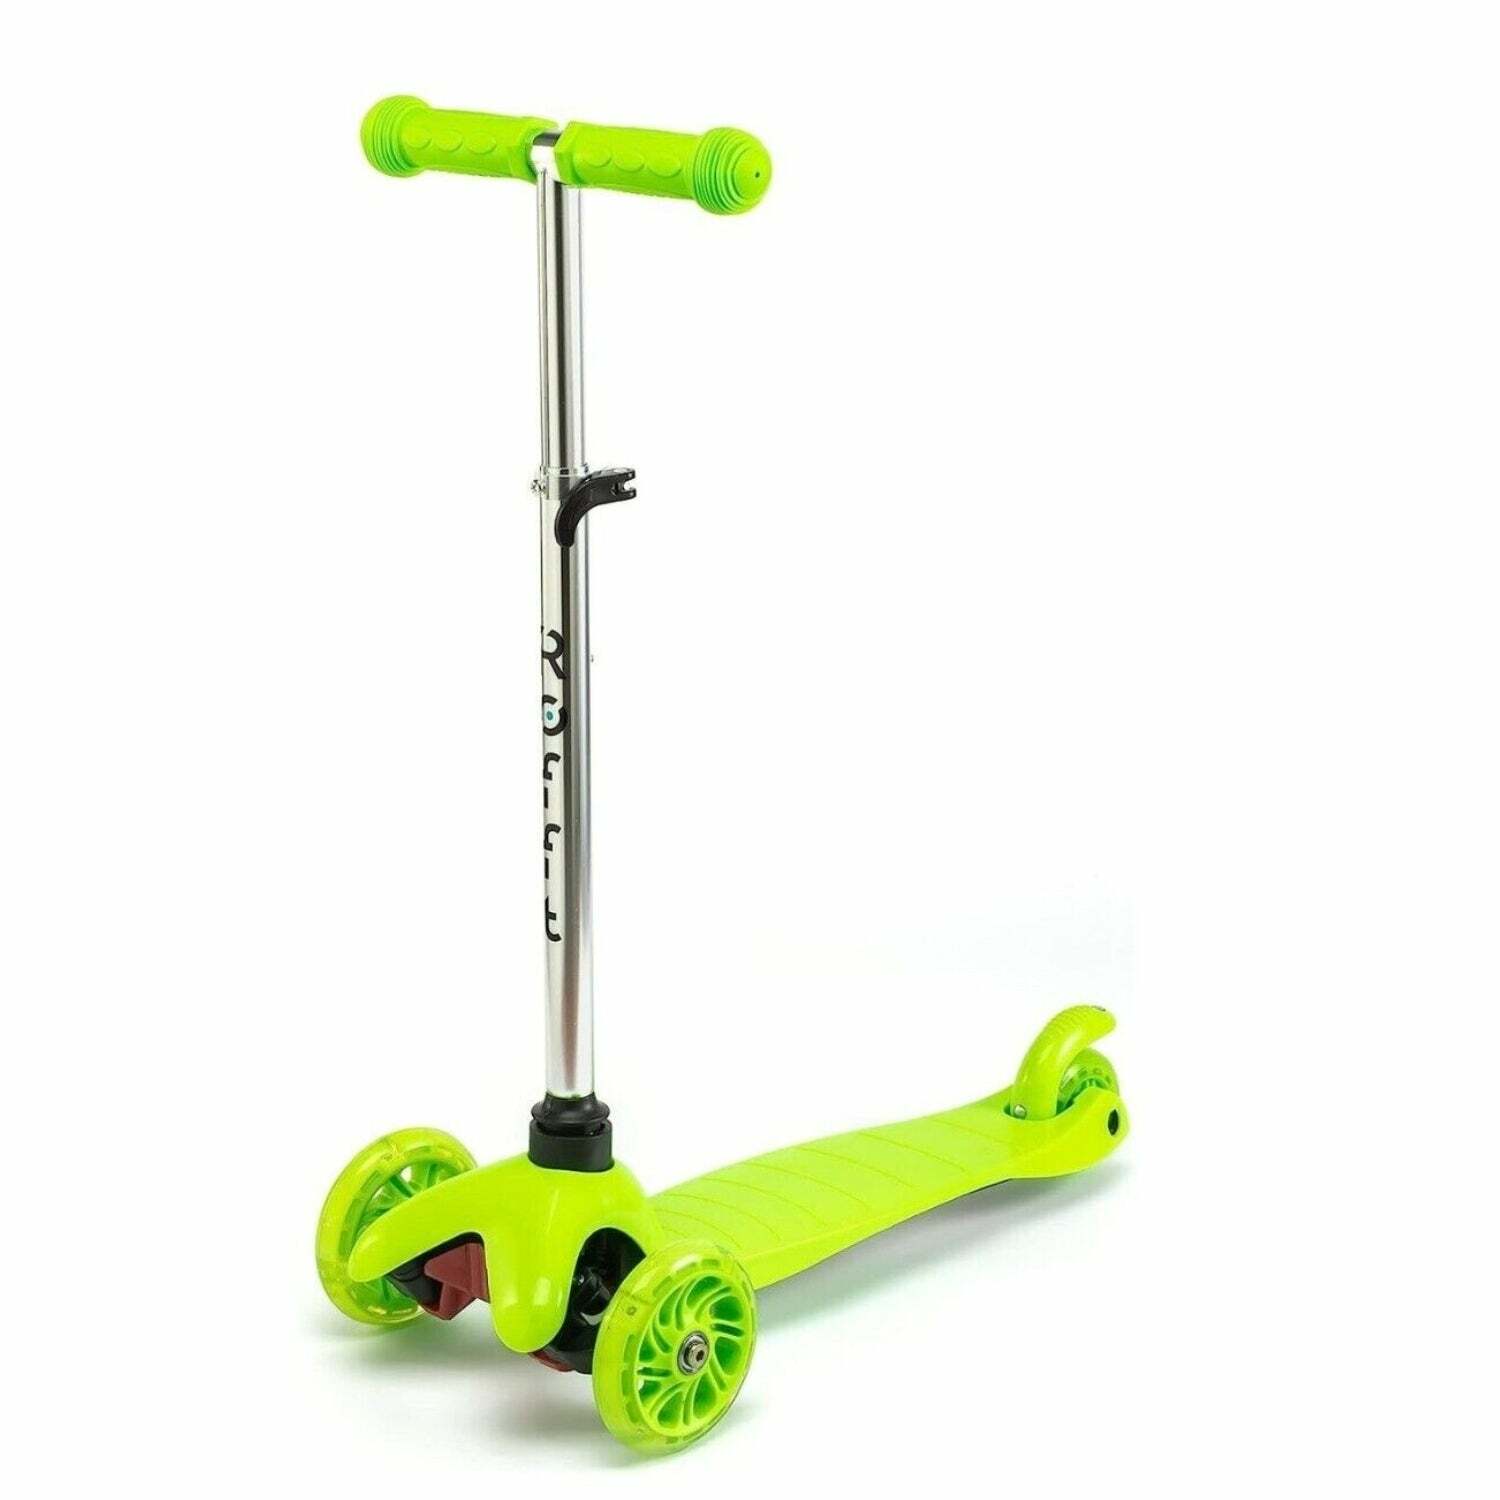 ROFFT - Kick Scooter, Lean-to-Steer LED 3 Wheel, Kids Ages 3-5 Green